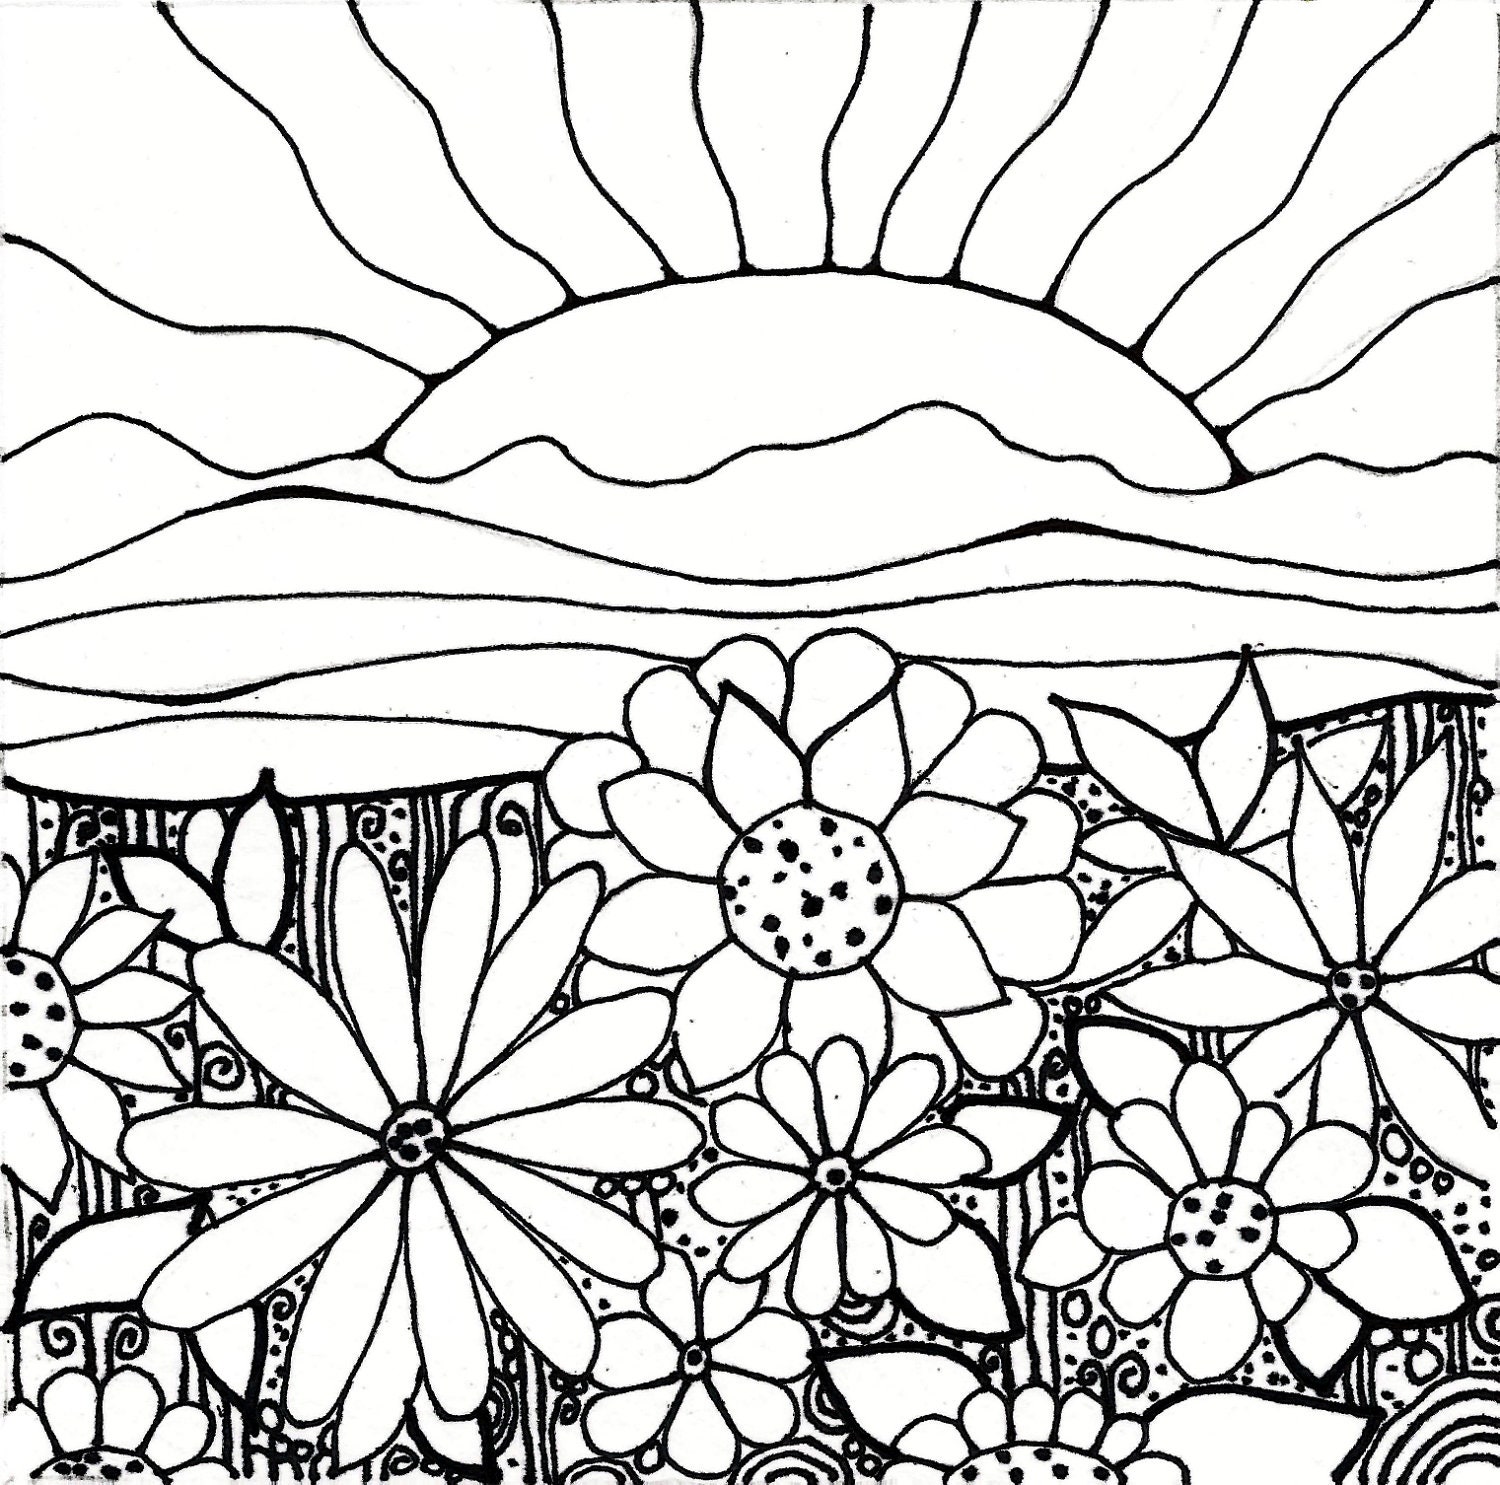 Garden Scenery Coloring Pages For Adults My Friend Tasha Goddard Is A